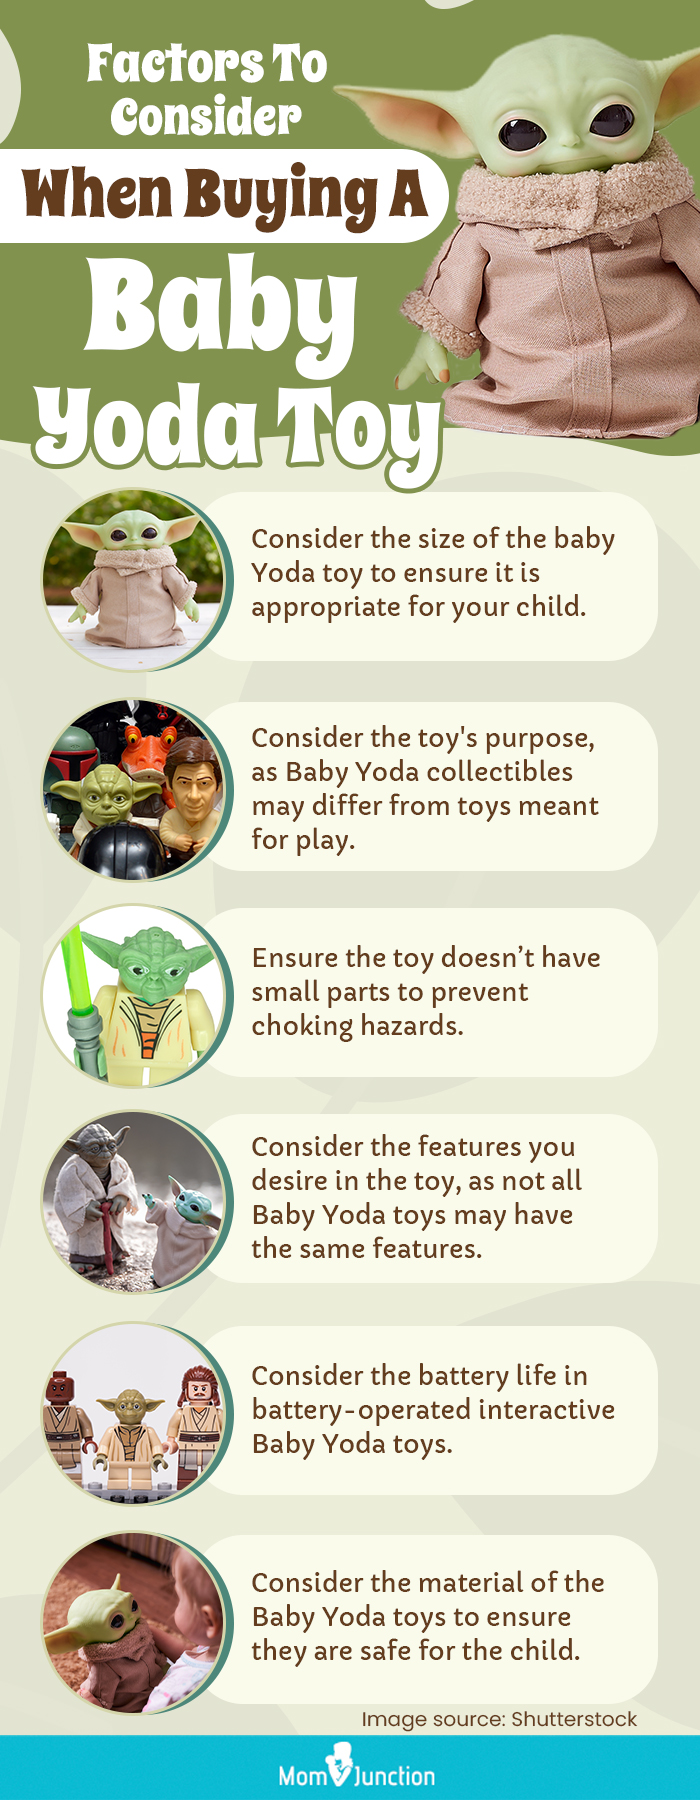 Factors To Consider When Buying A Baby Yoda Toy (infographic)